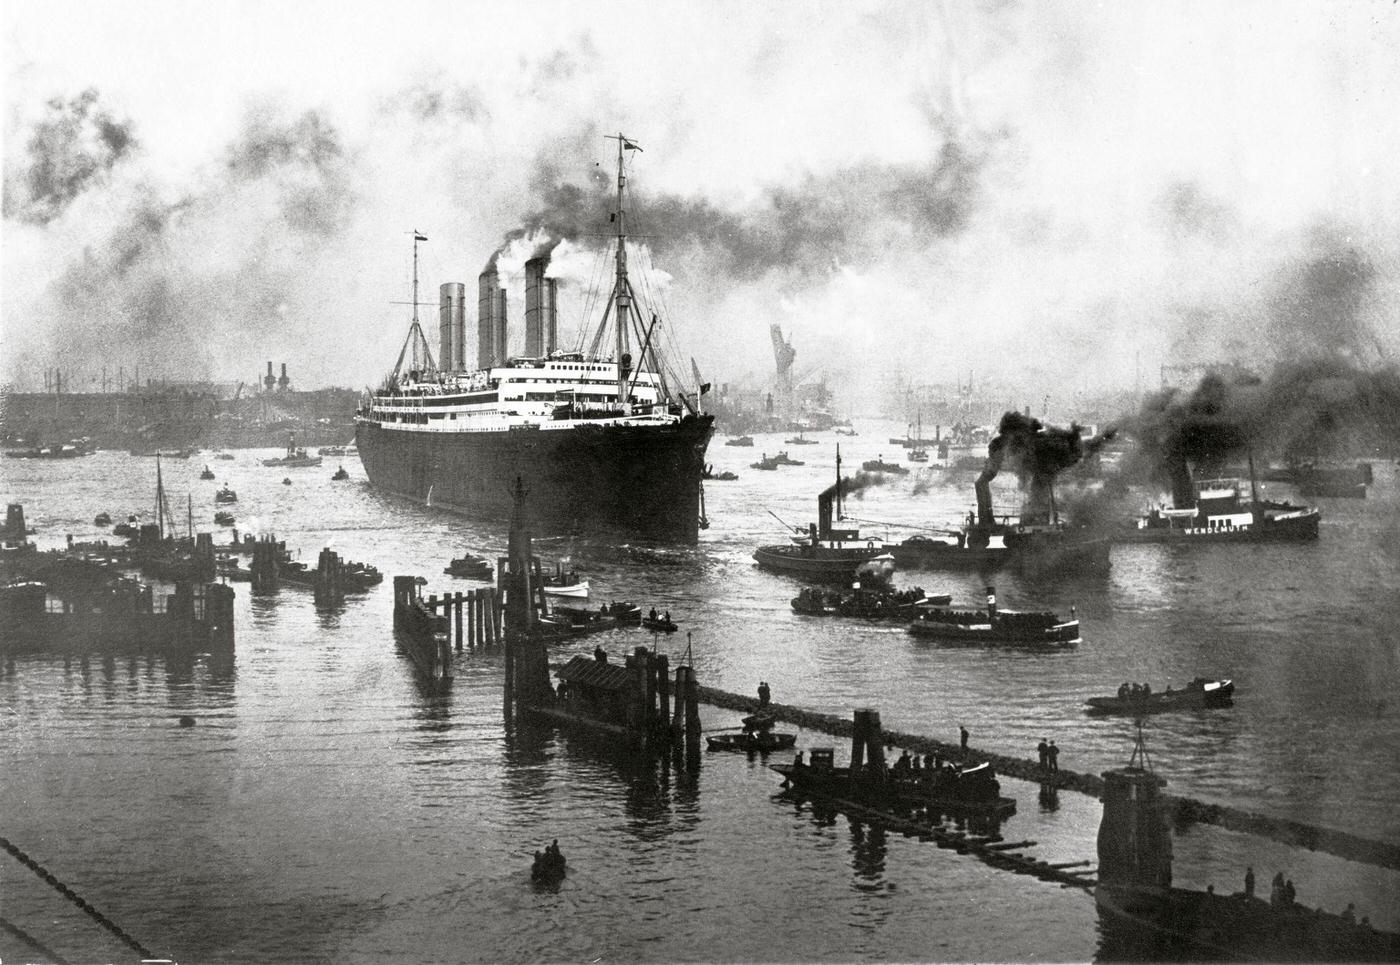 Maiden voyage of the "Imperator", the largest ship in the world, leaving from the harbor in Hamburg, Germany, 1913